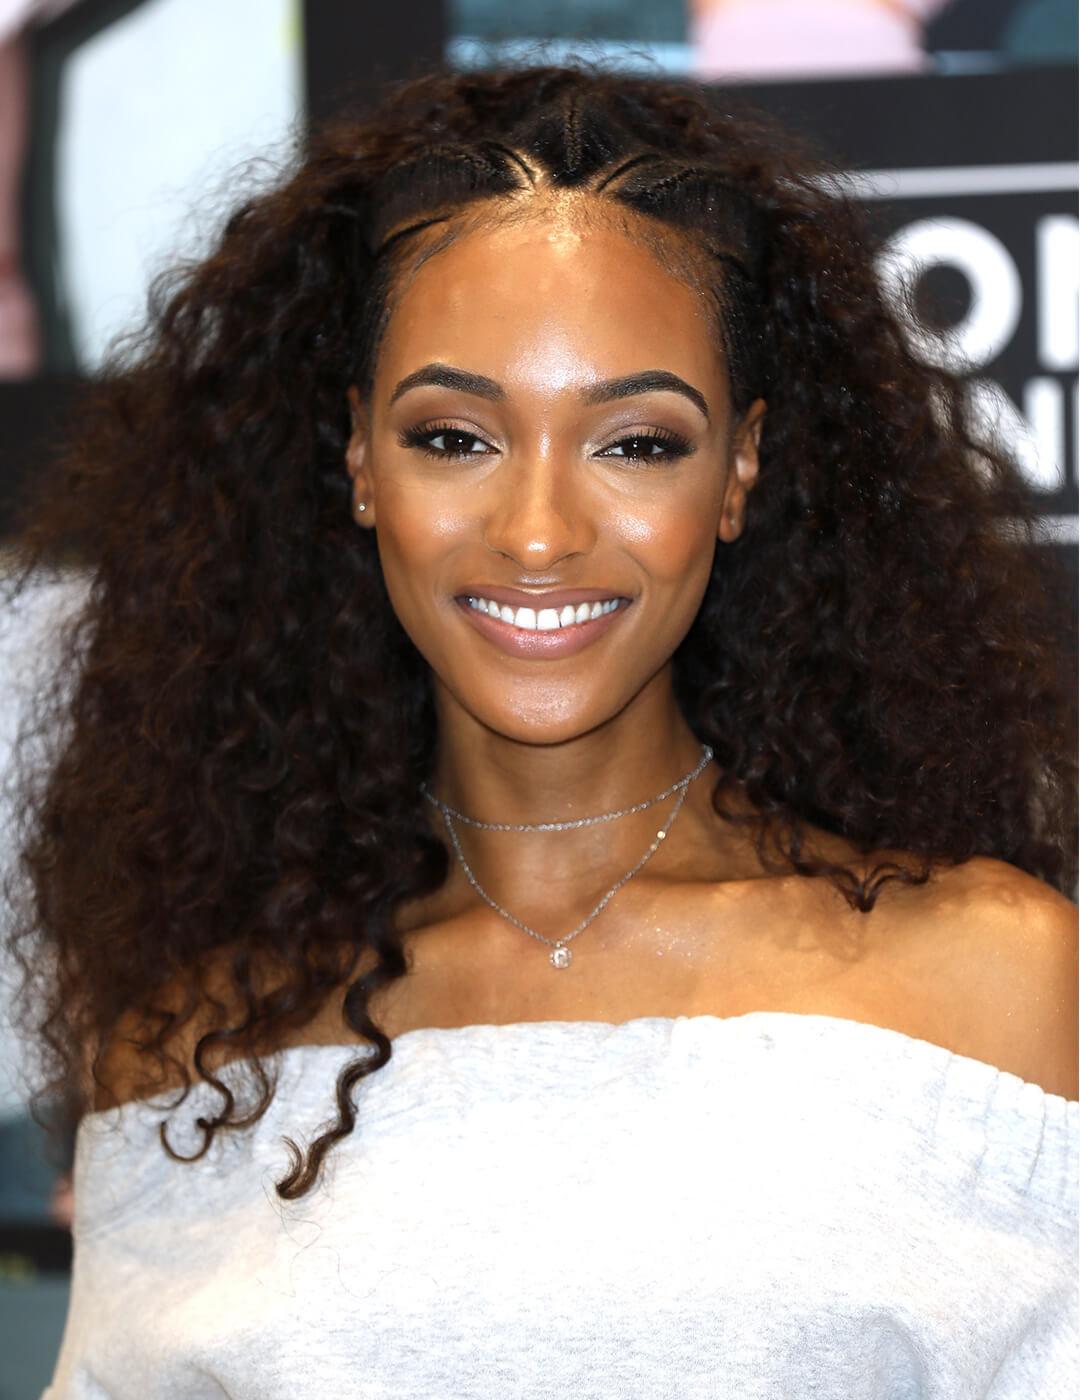 Jourdan Dunn looking glamorous in a white dress paired with an Albasso Braids hairstyle